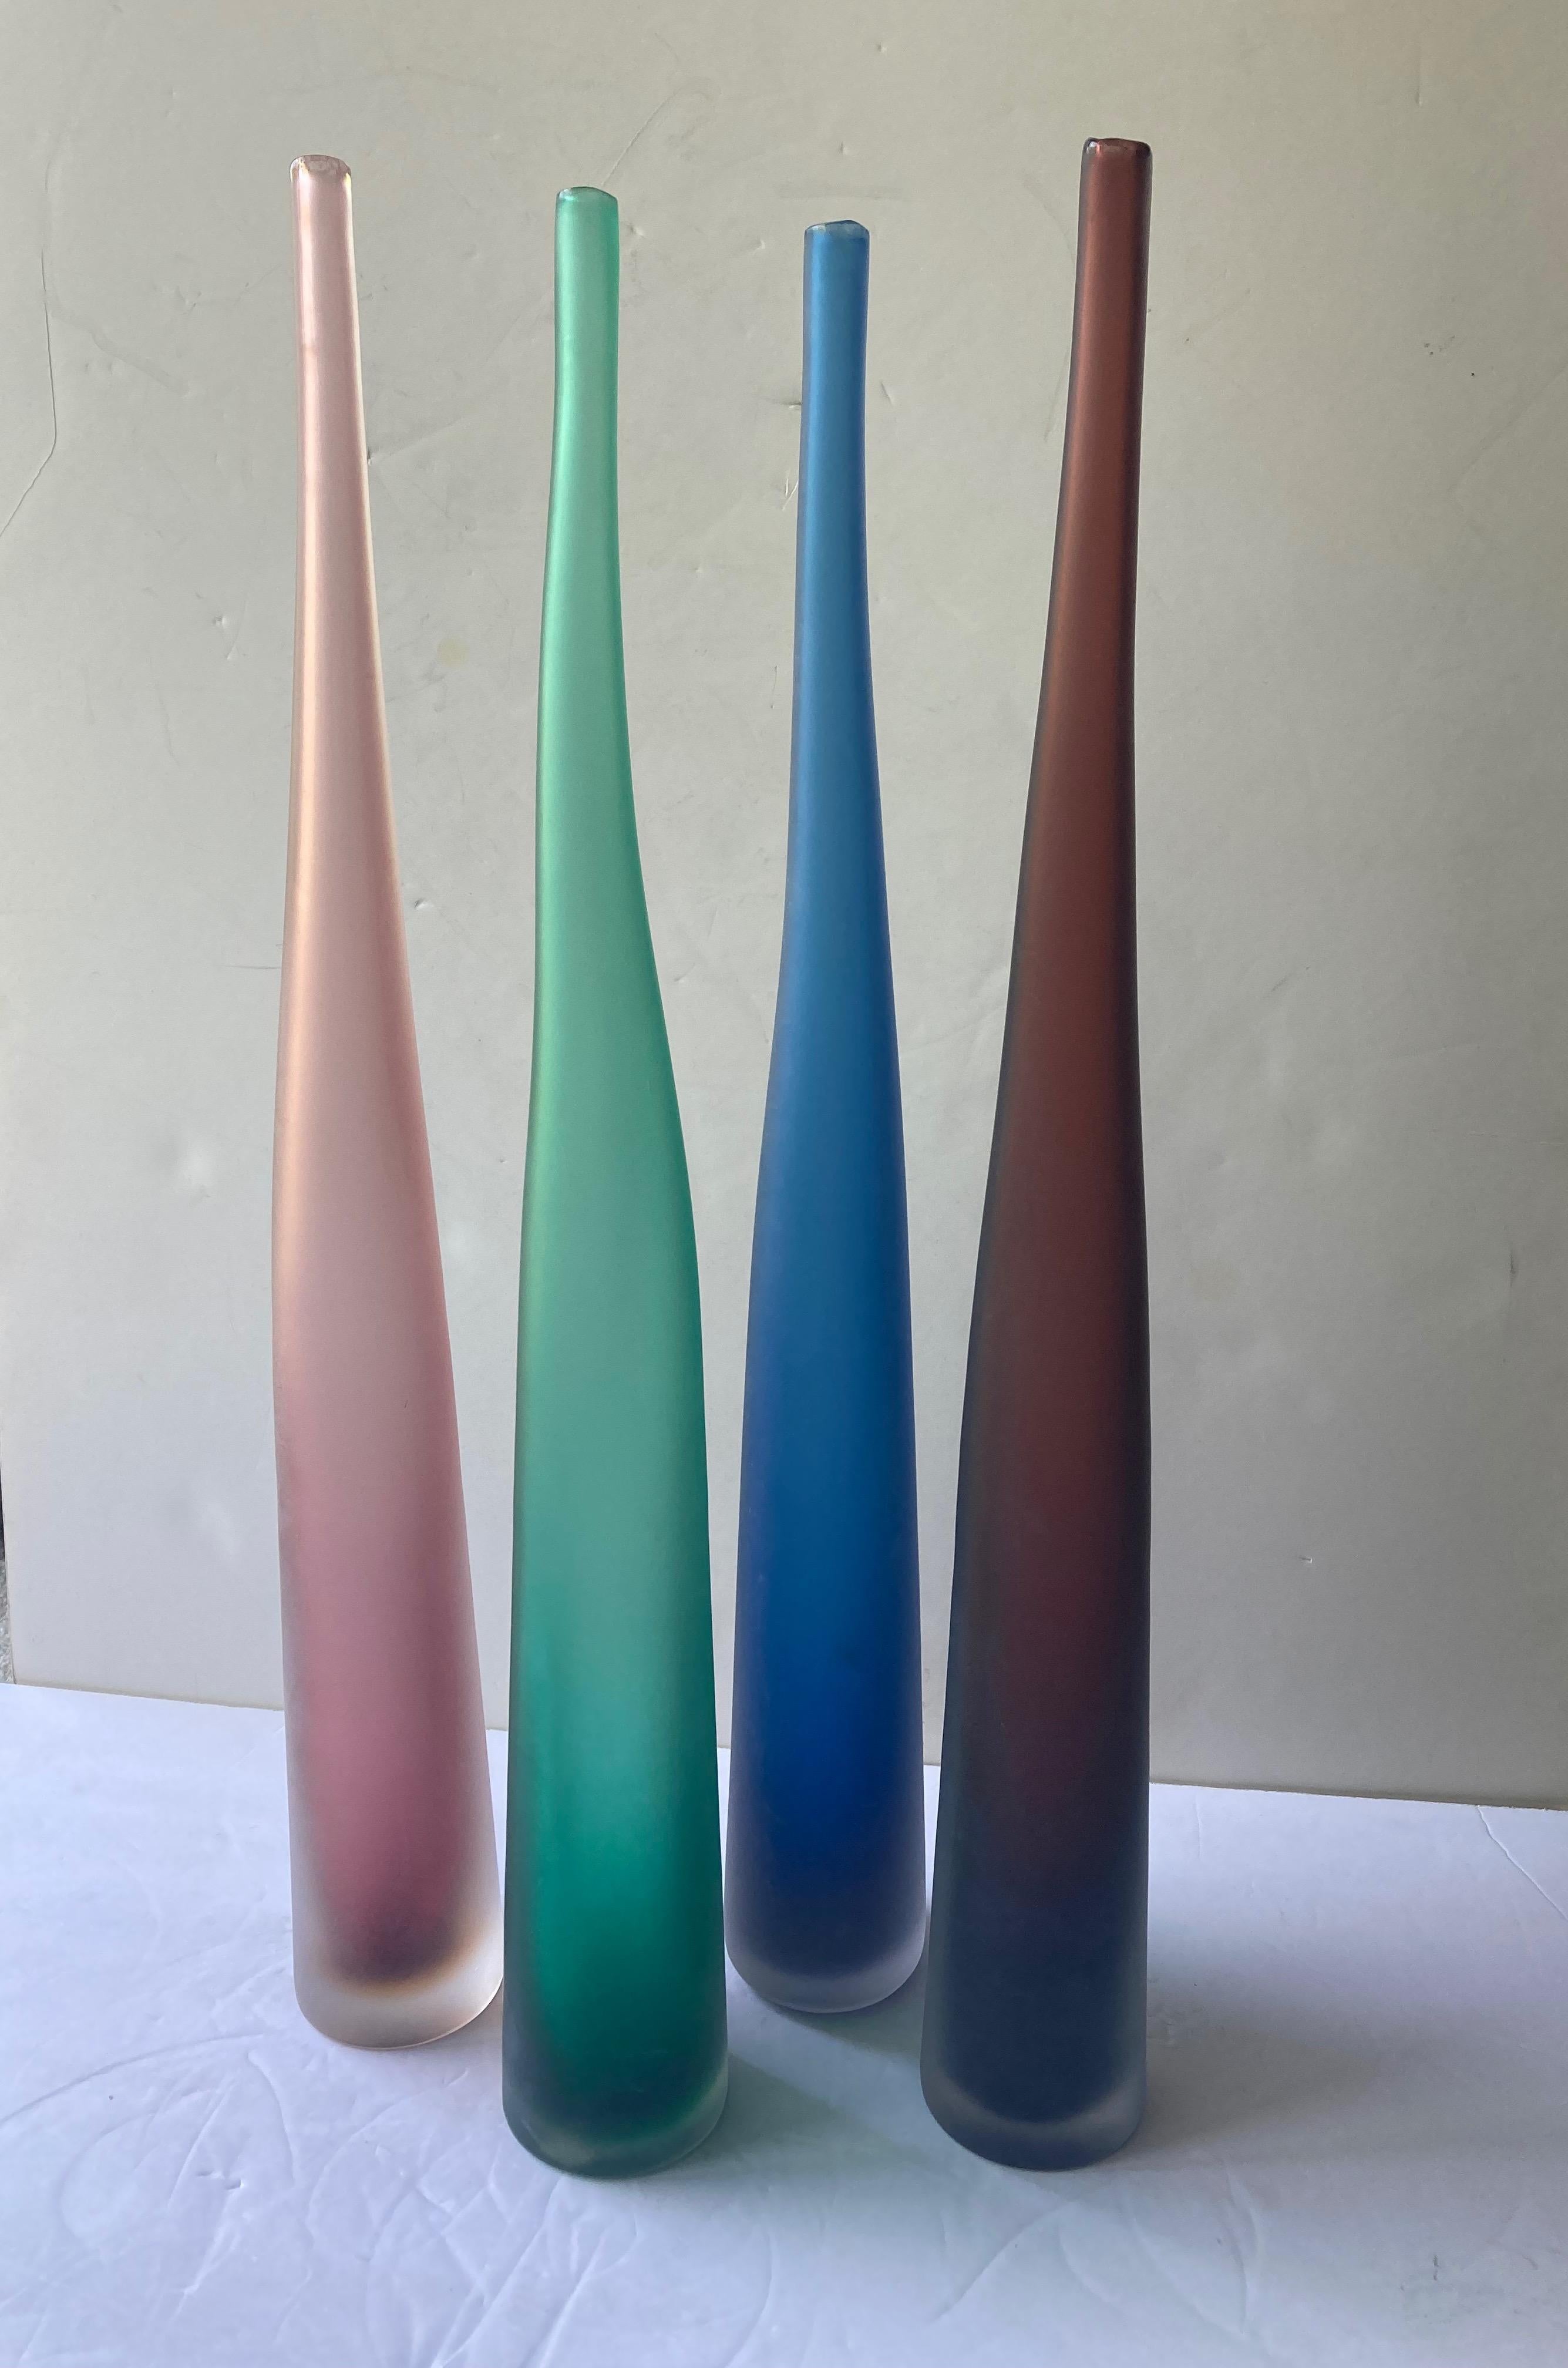 Hand-Crafted Laura de Santillana, Small Collection of Murano Glass Bottles/Vases, by Arcade